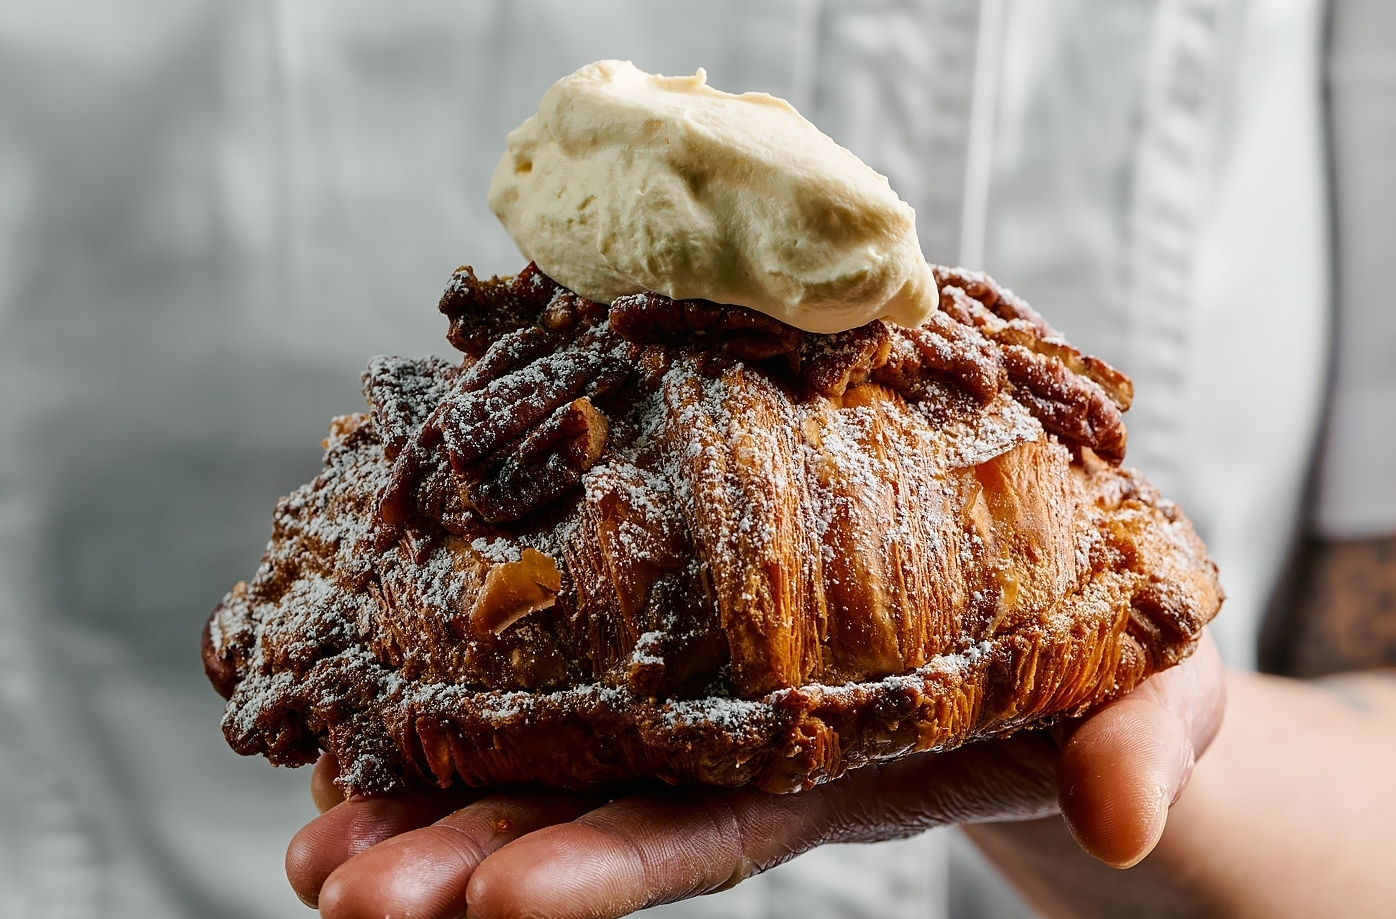 If you're looking for things to do in Melbourne, check out Lune and try one of these flaky, buttery croissants.